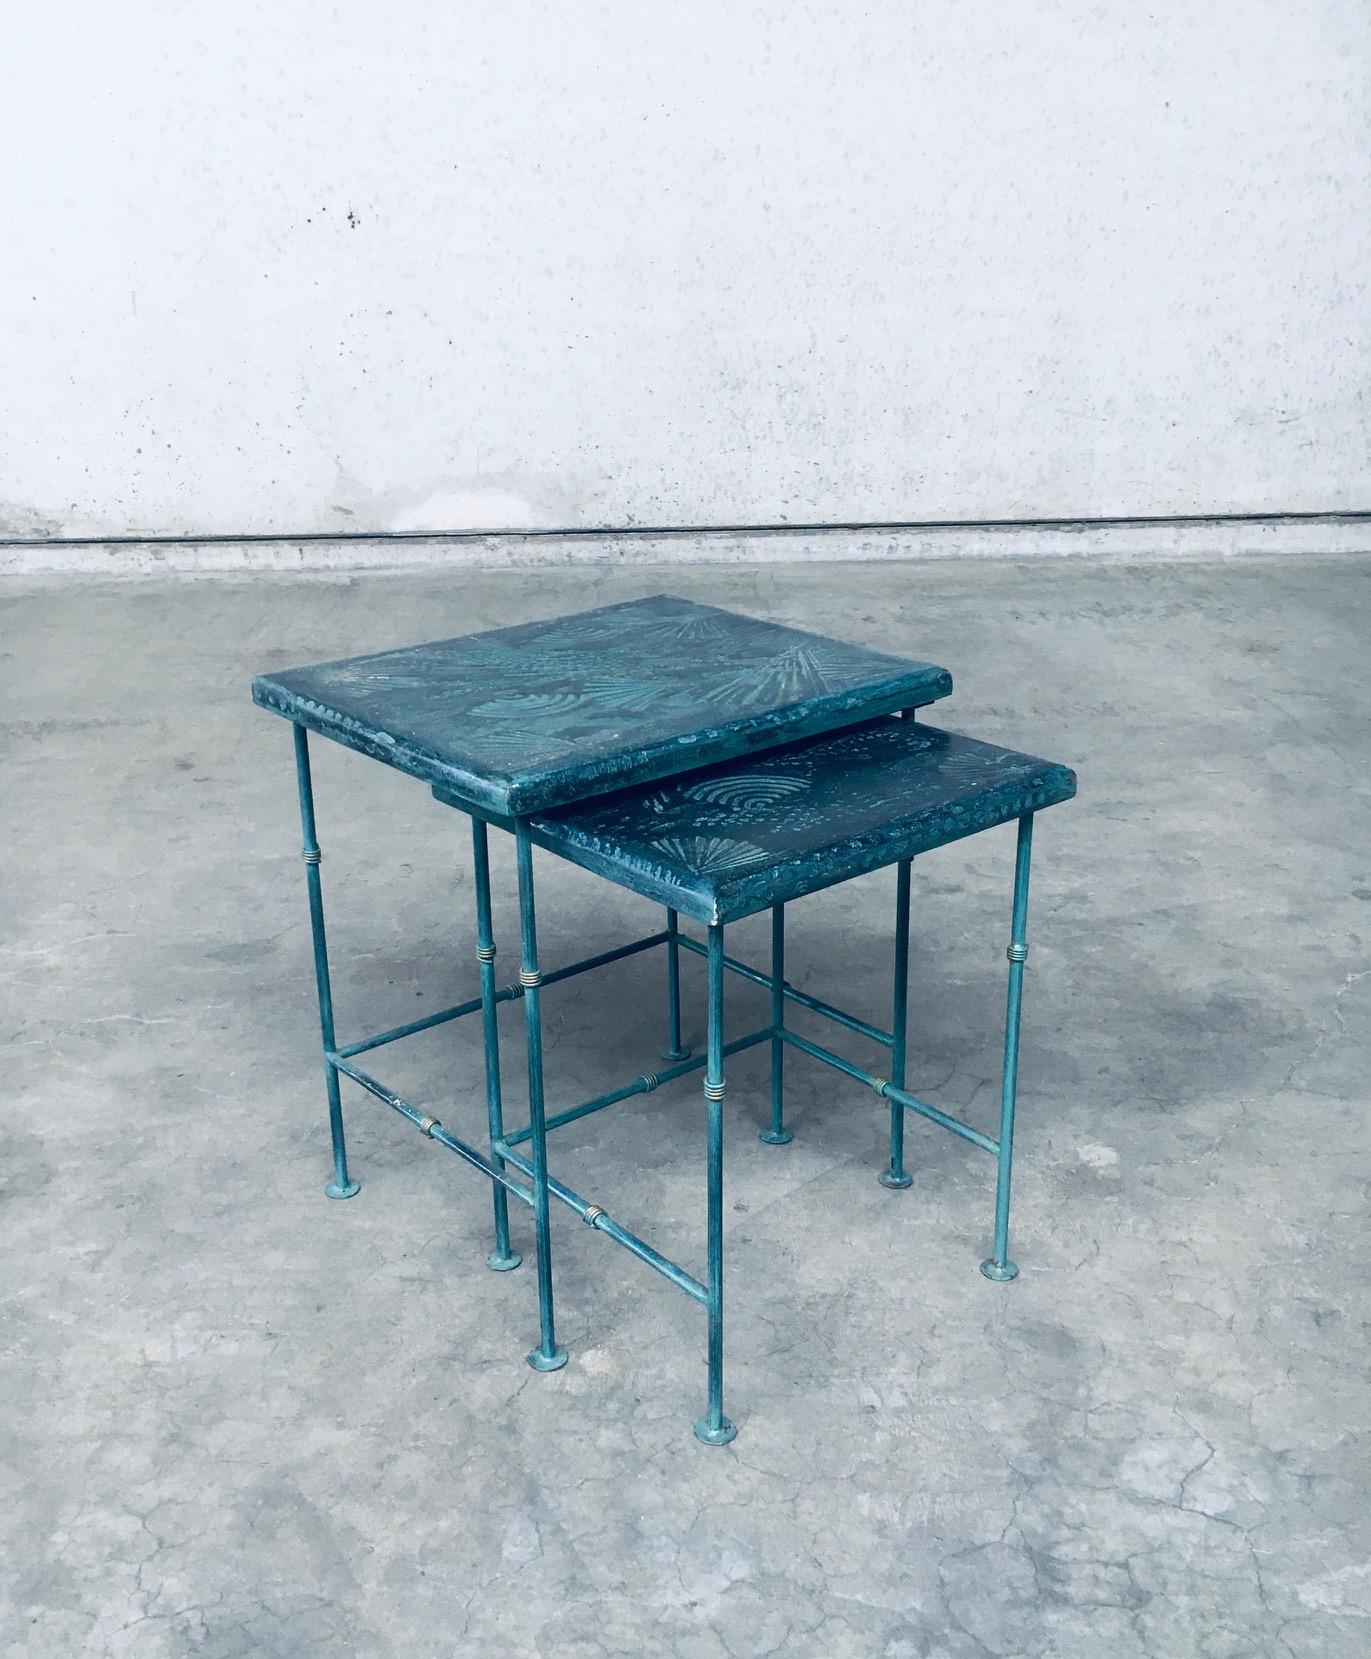 Postmodern Design Art Handmade Nesting Table set by J. Berdou. Made in France, 1980's period. Signed by the artist on the large model table. A Rare nesting / side table set with beautiful slender design. Hand made by the artist. Turquoise green